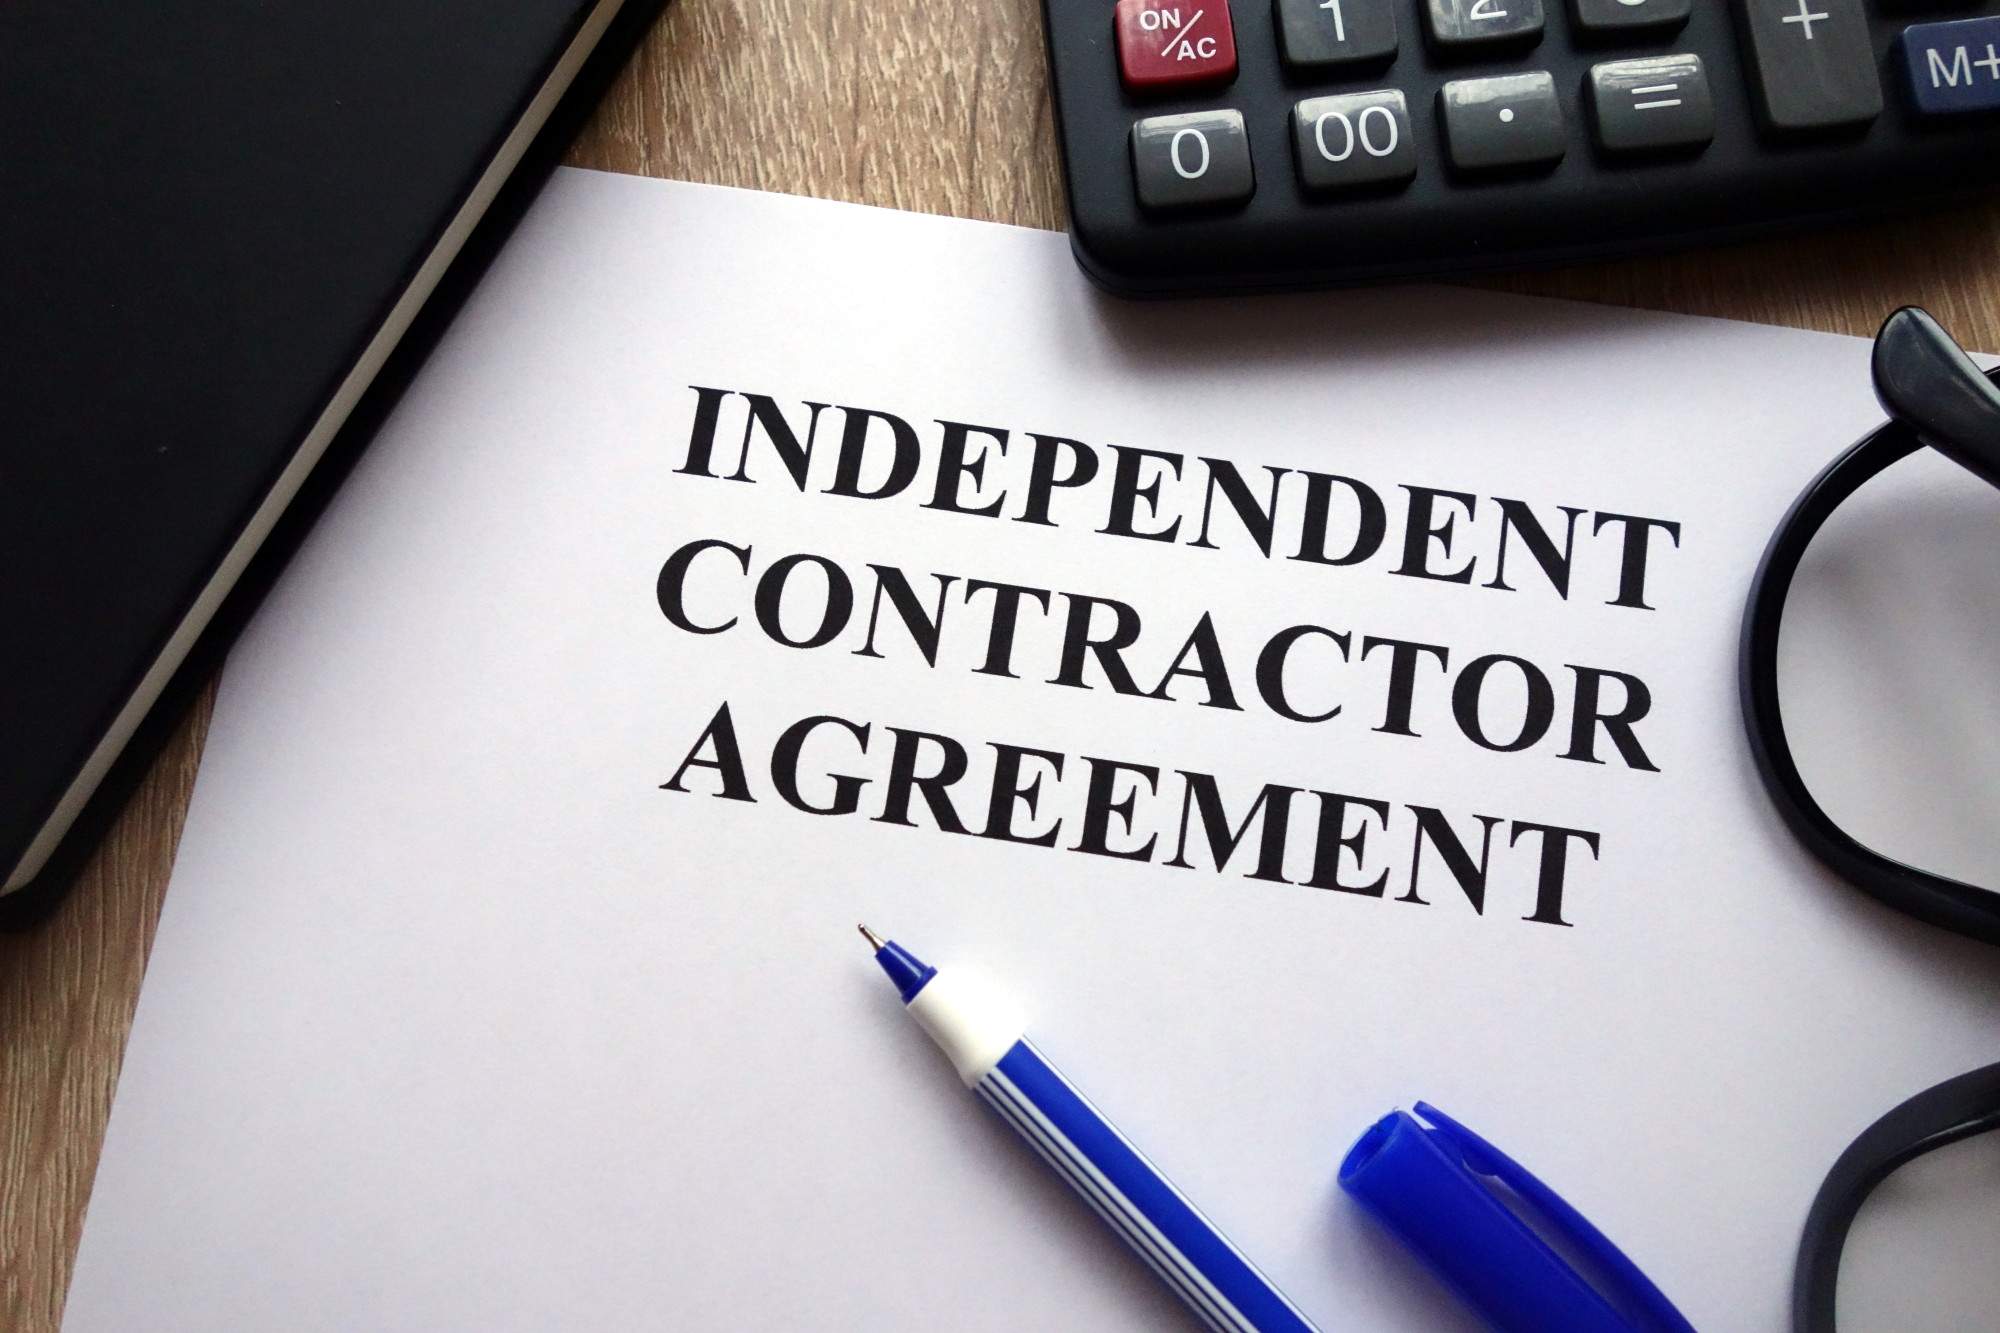 Employee vs. Independent Contractor: What Are the Differences?